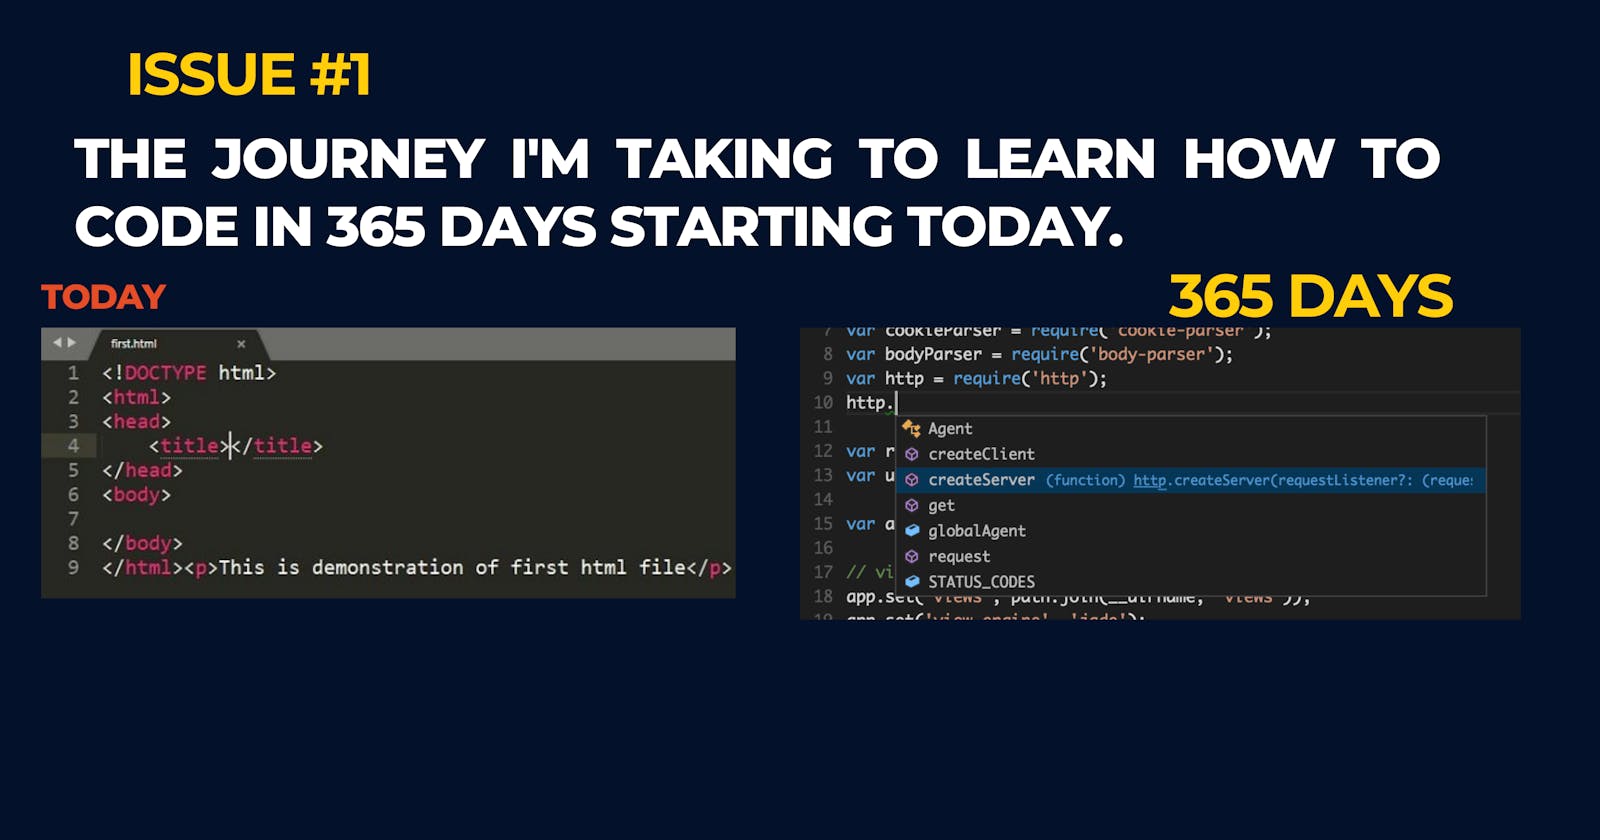 Issue #1 - The Journey I'm Taking to learn how to Code in 365 Days Starting Today.